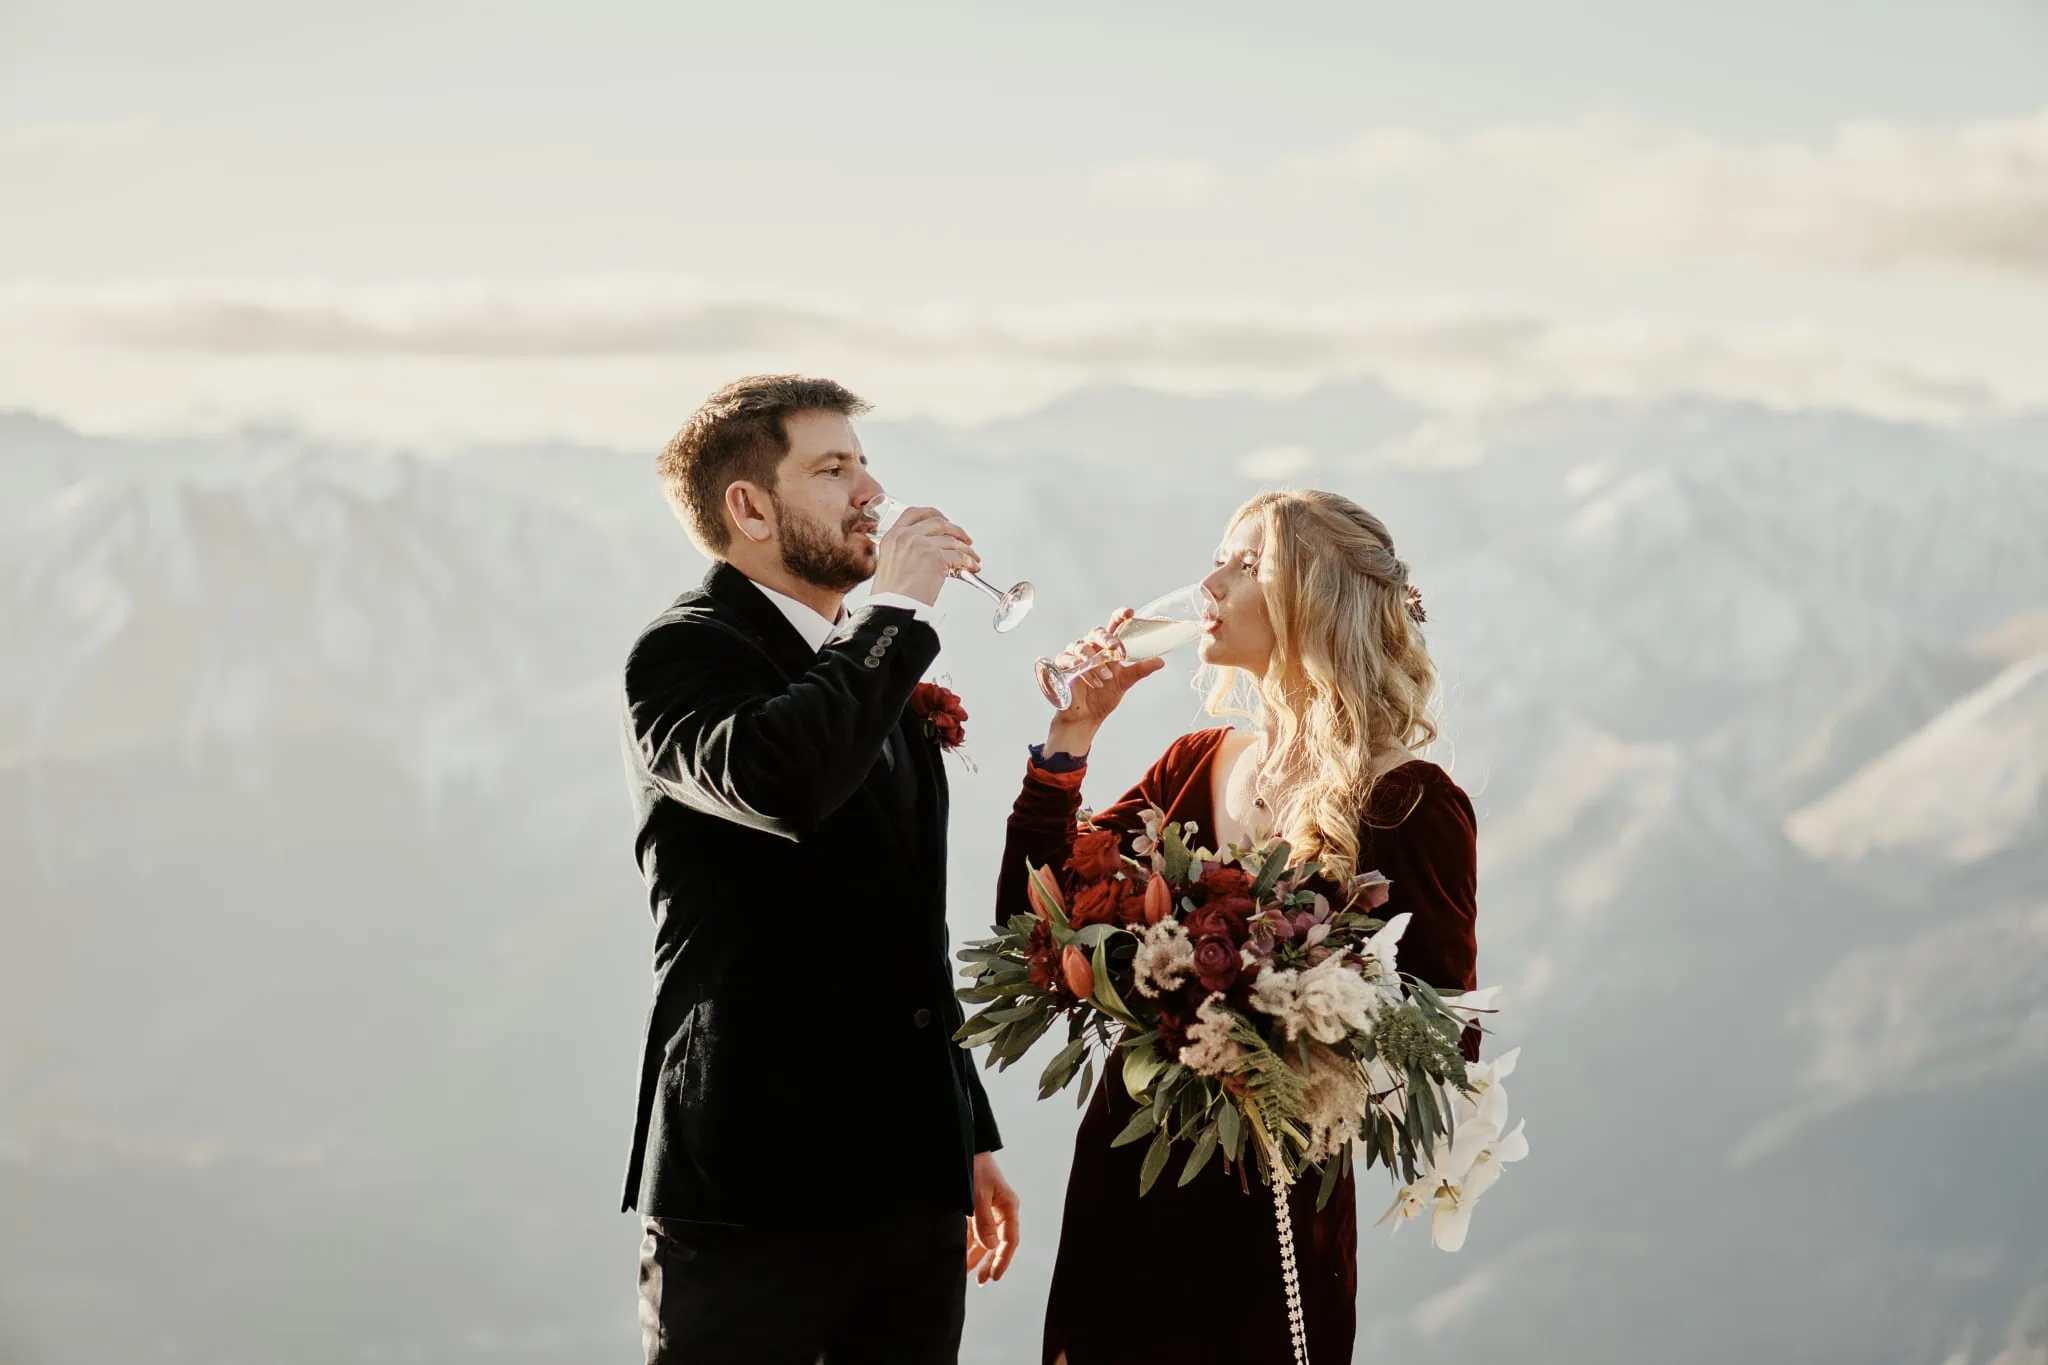 Claire and Rob's heli elopement wedding on Cecil Peak includes wine and breathtaking views.